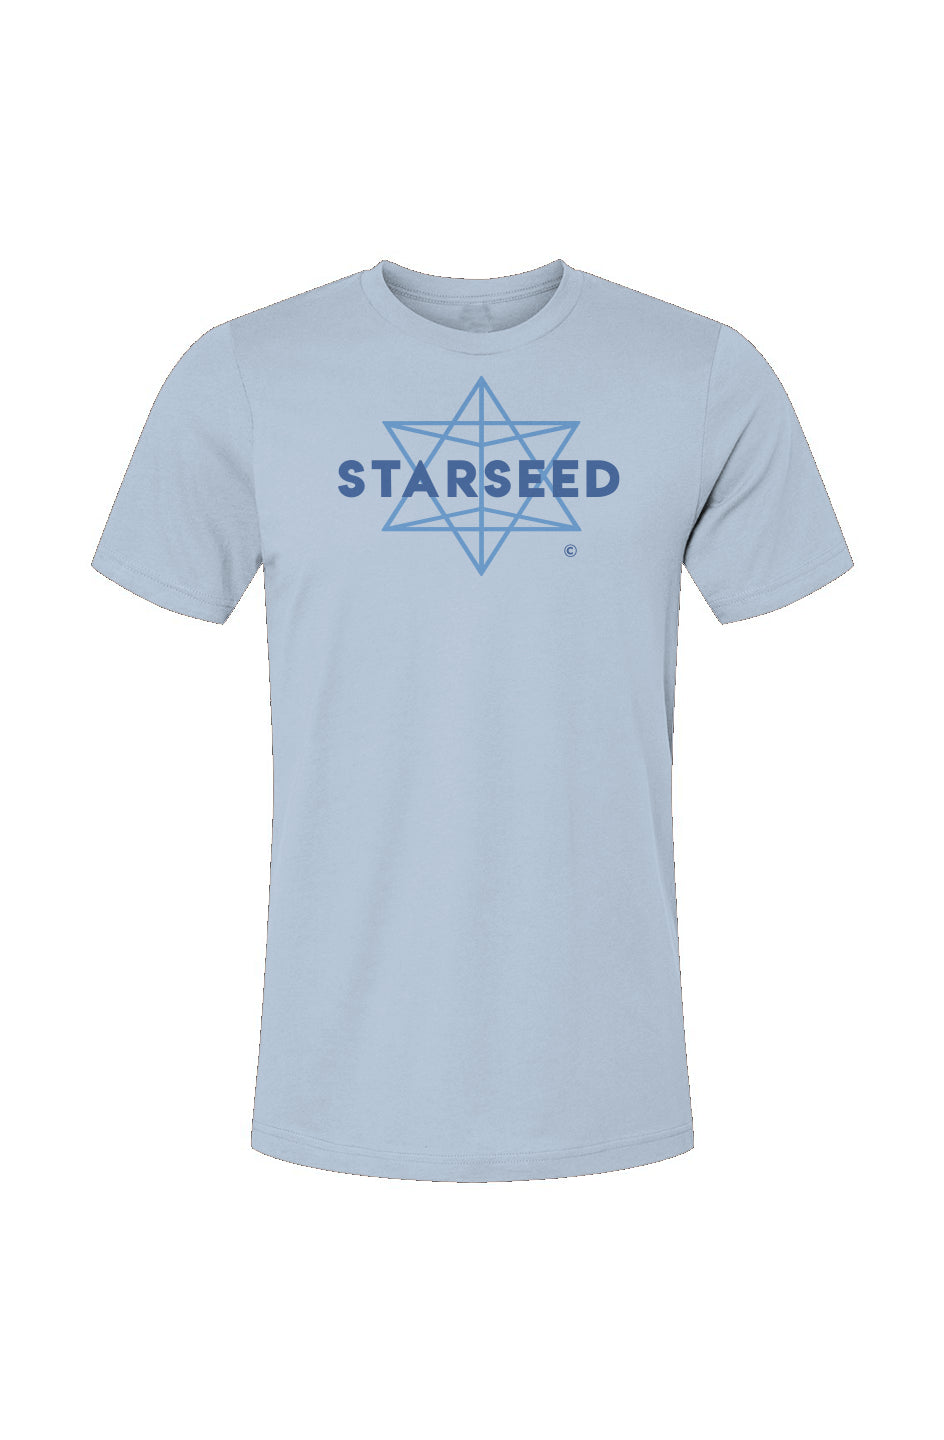 the starseed collection: monochromatic unisex t-shirt